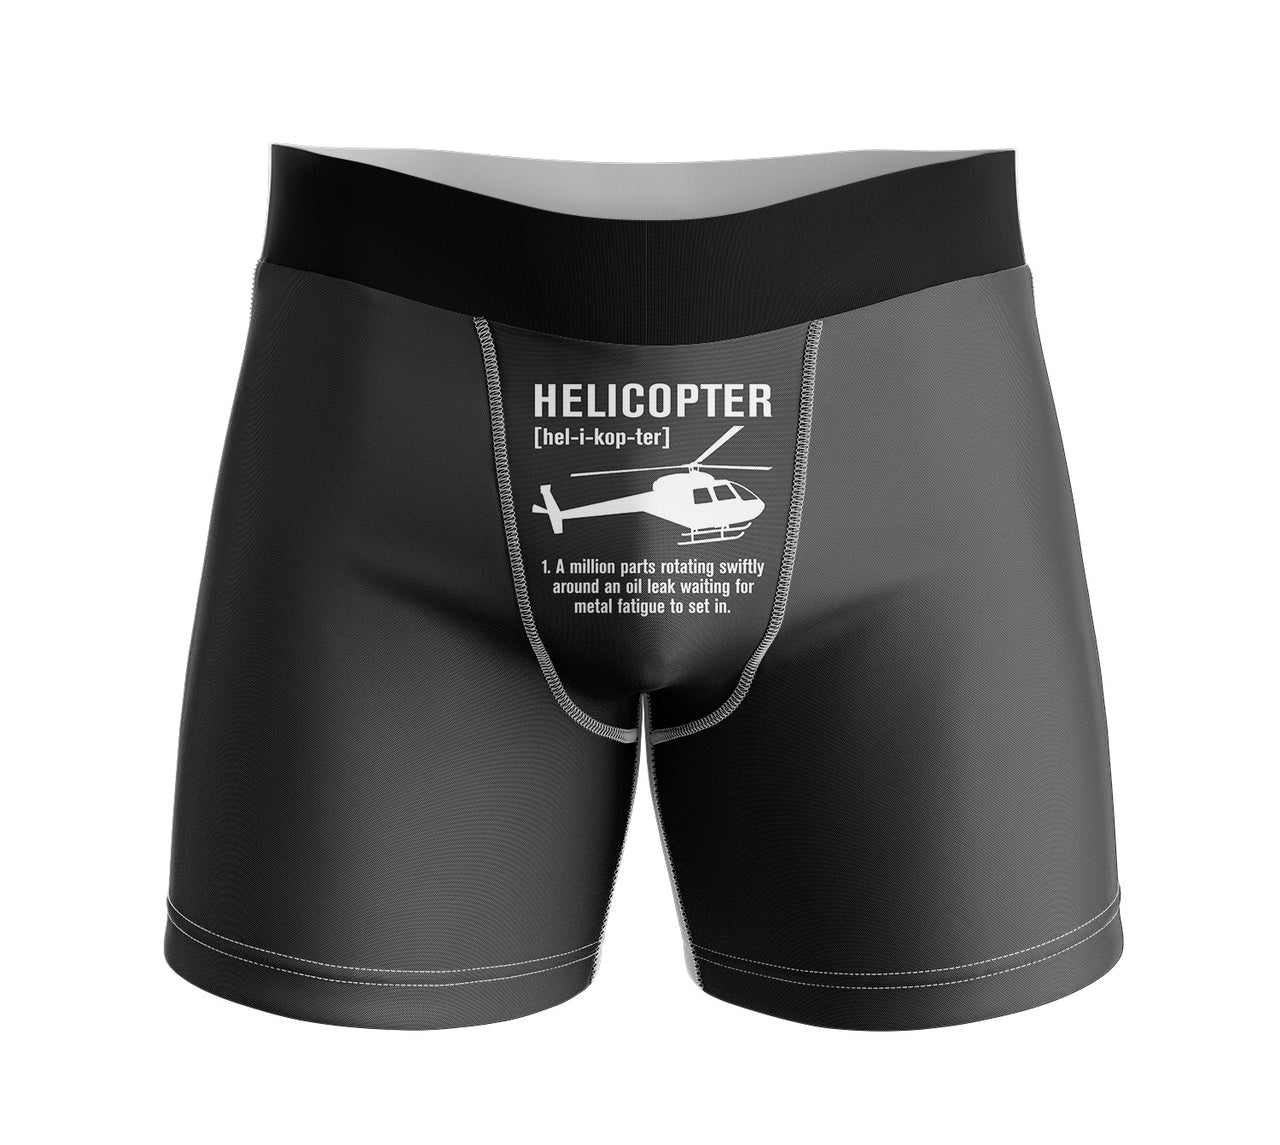 AERO - Underwear is our passion, but wait until you try what we